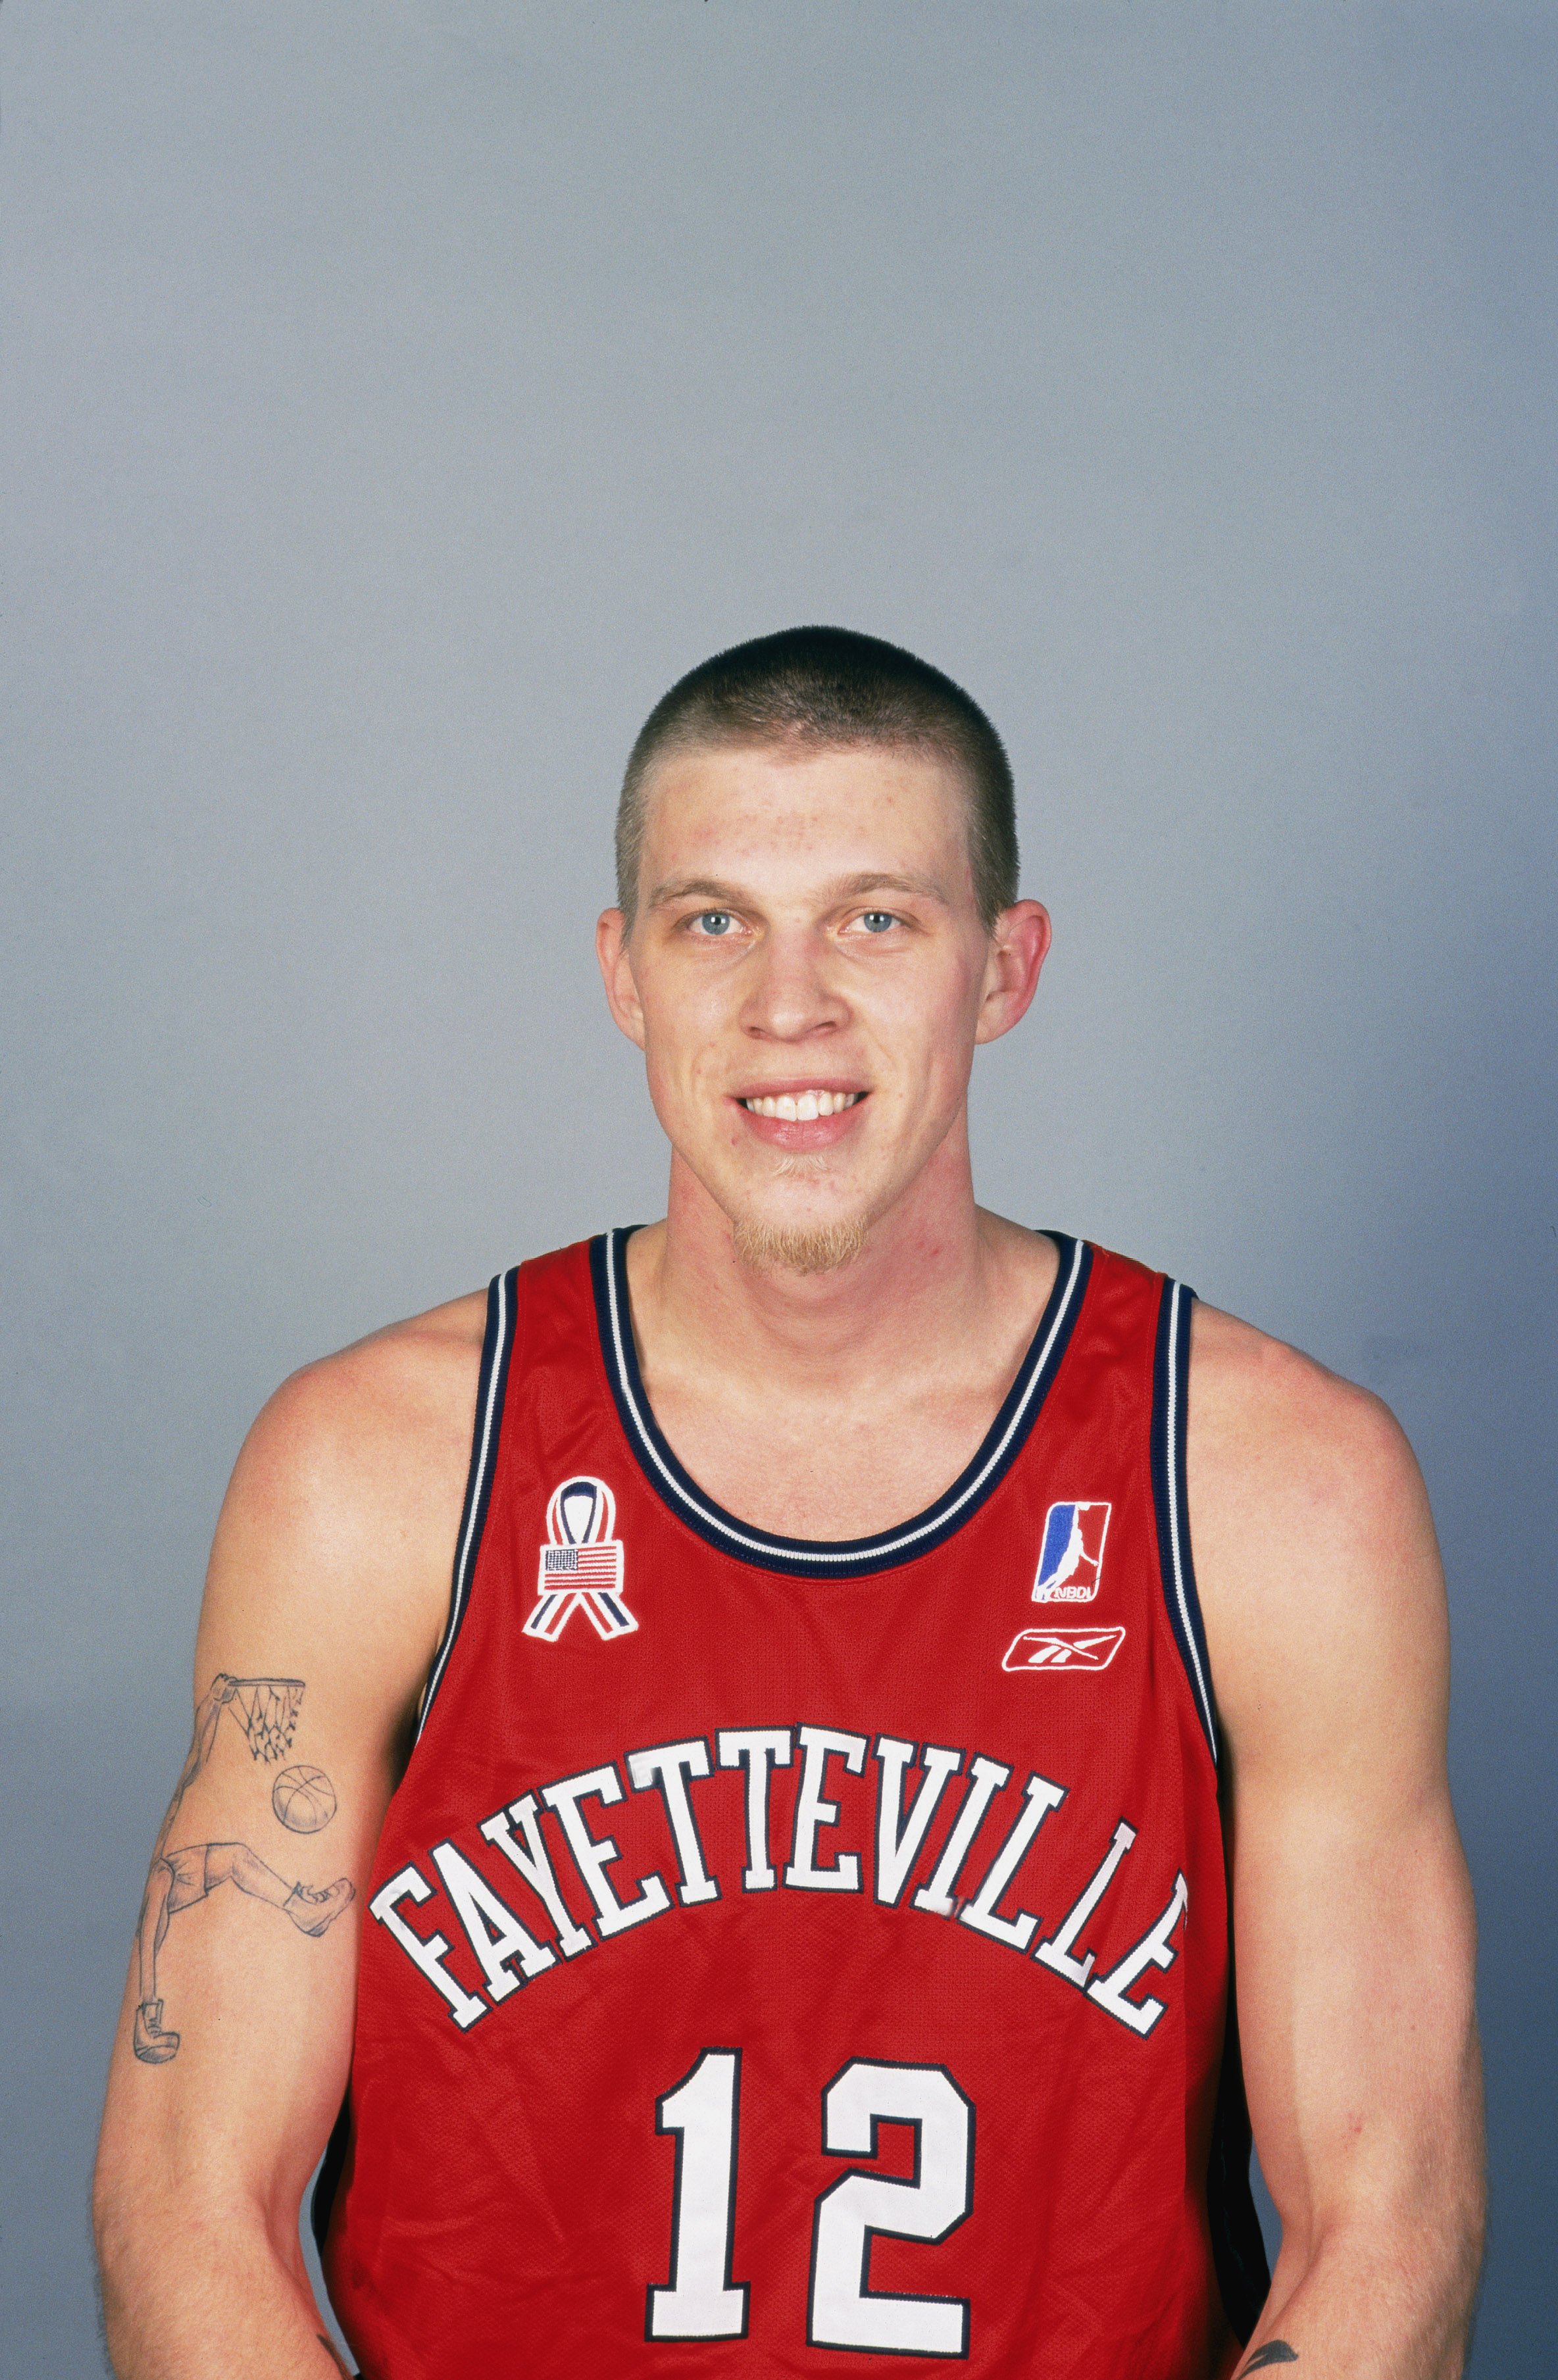 Previamente para ver Susteen NBA G League on Twitter: "15 yrs ago today, Chris Andersen became the 1st  D-League draft pick ever! On Nov. 21, 2001, "Birdman" made his #NBA debut  for the @nuggets. https://t.co/7agiusecOB" /